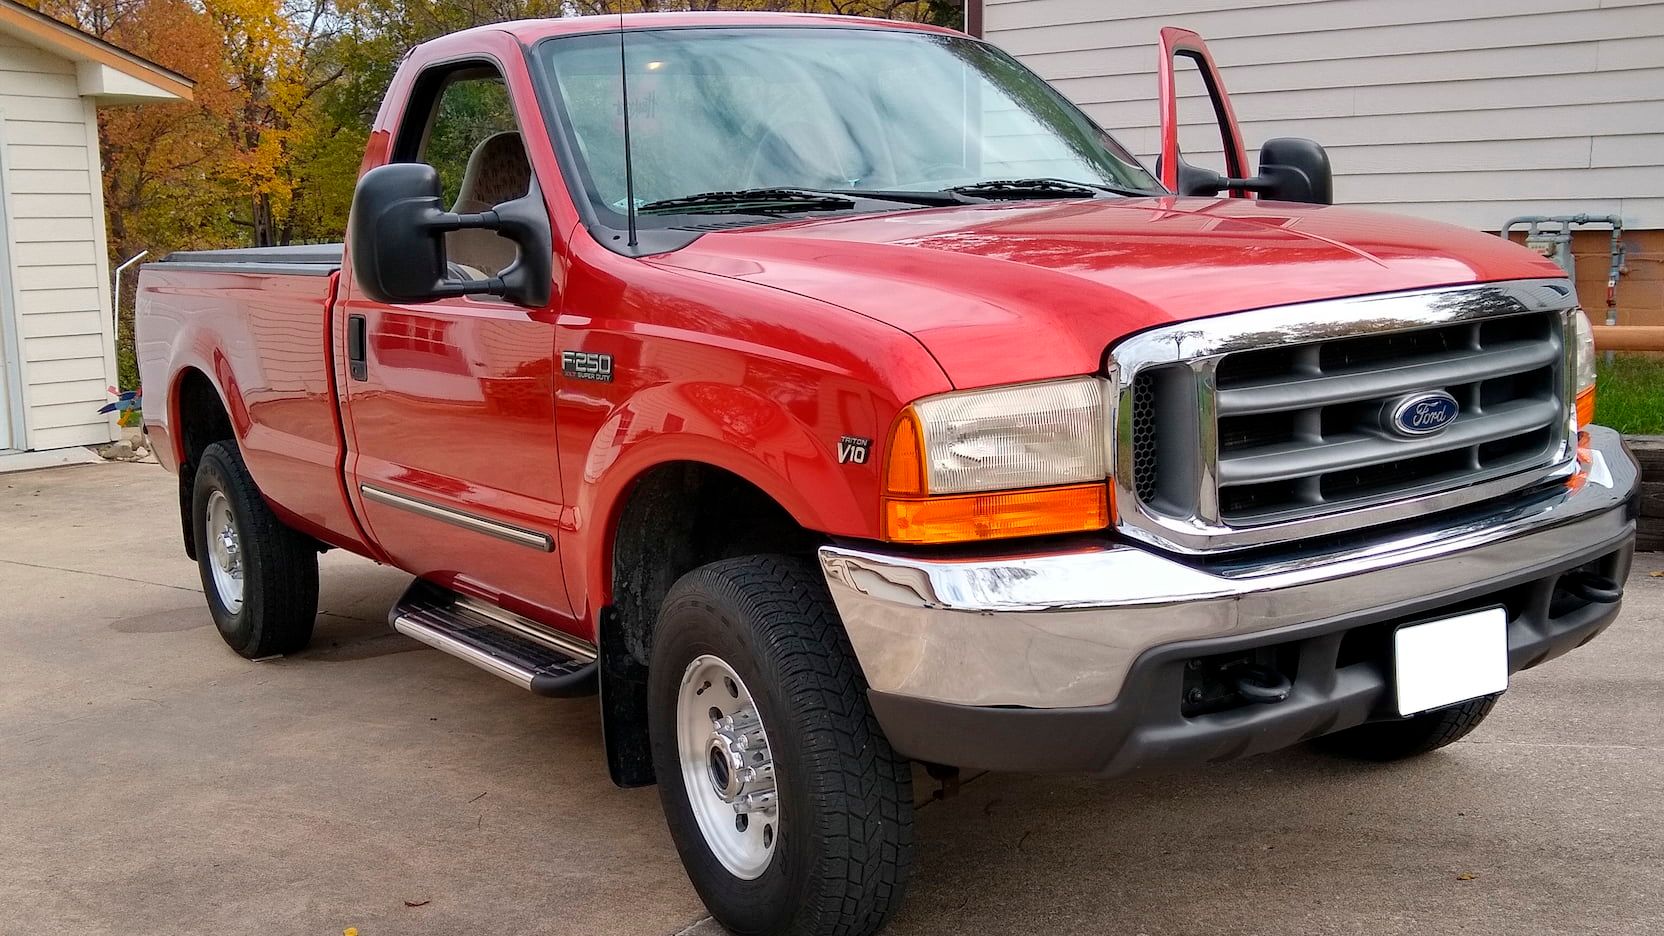 2000 Ford F-250 Super Duty, Red